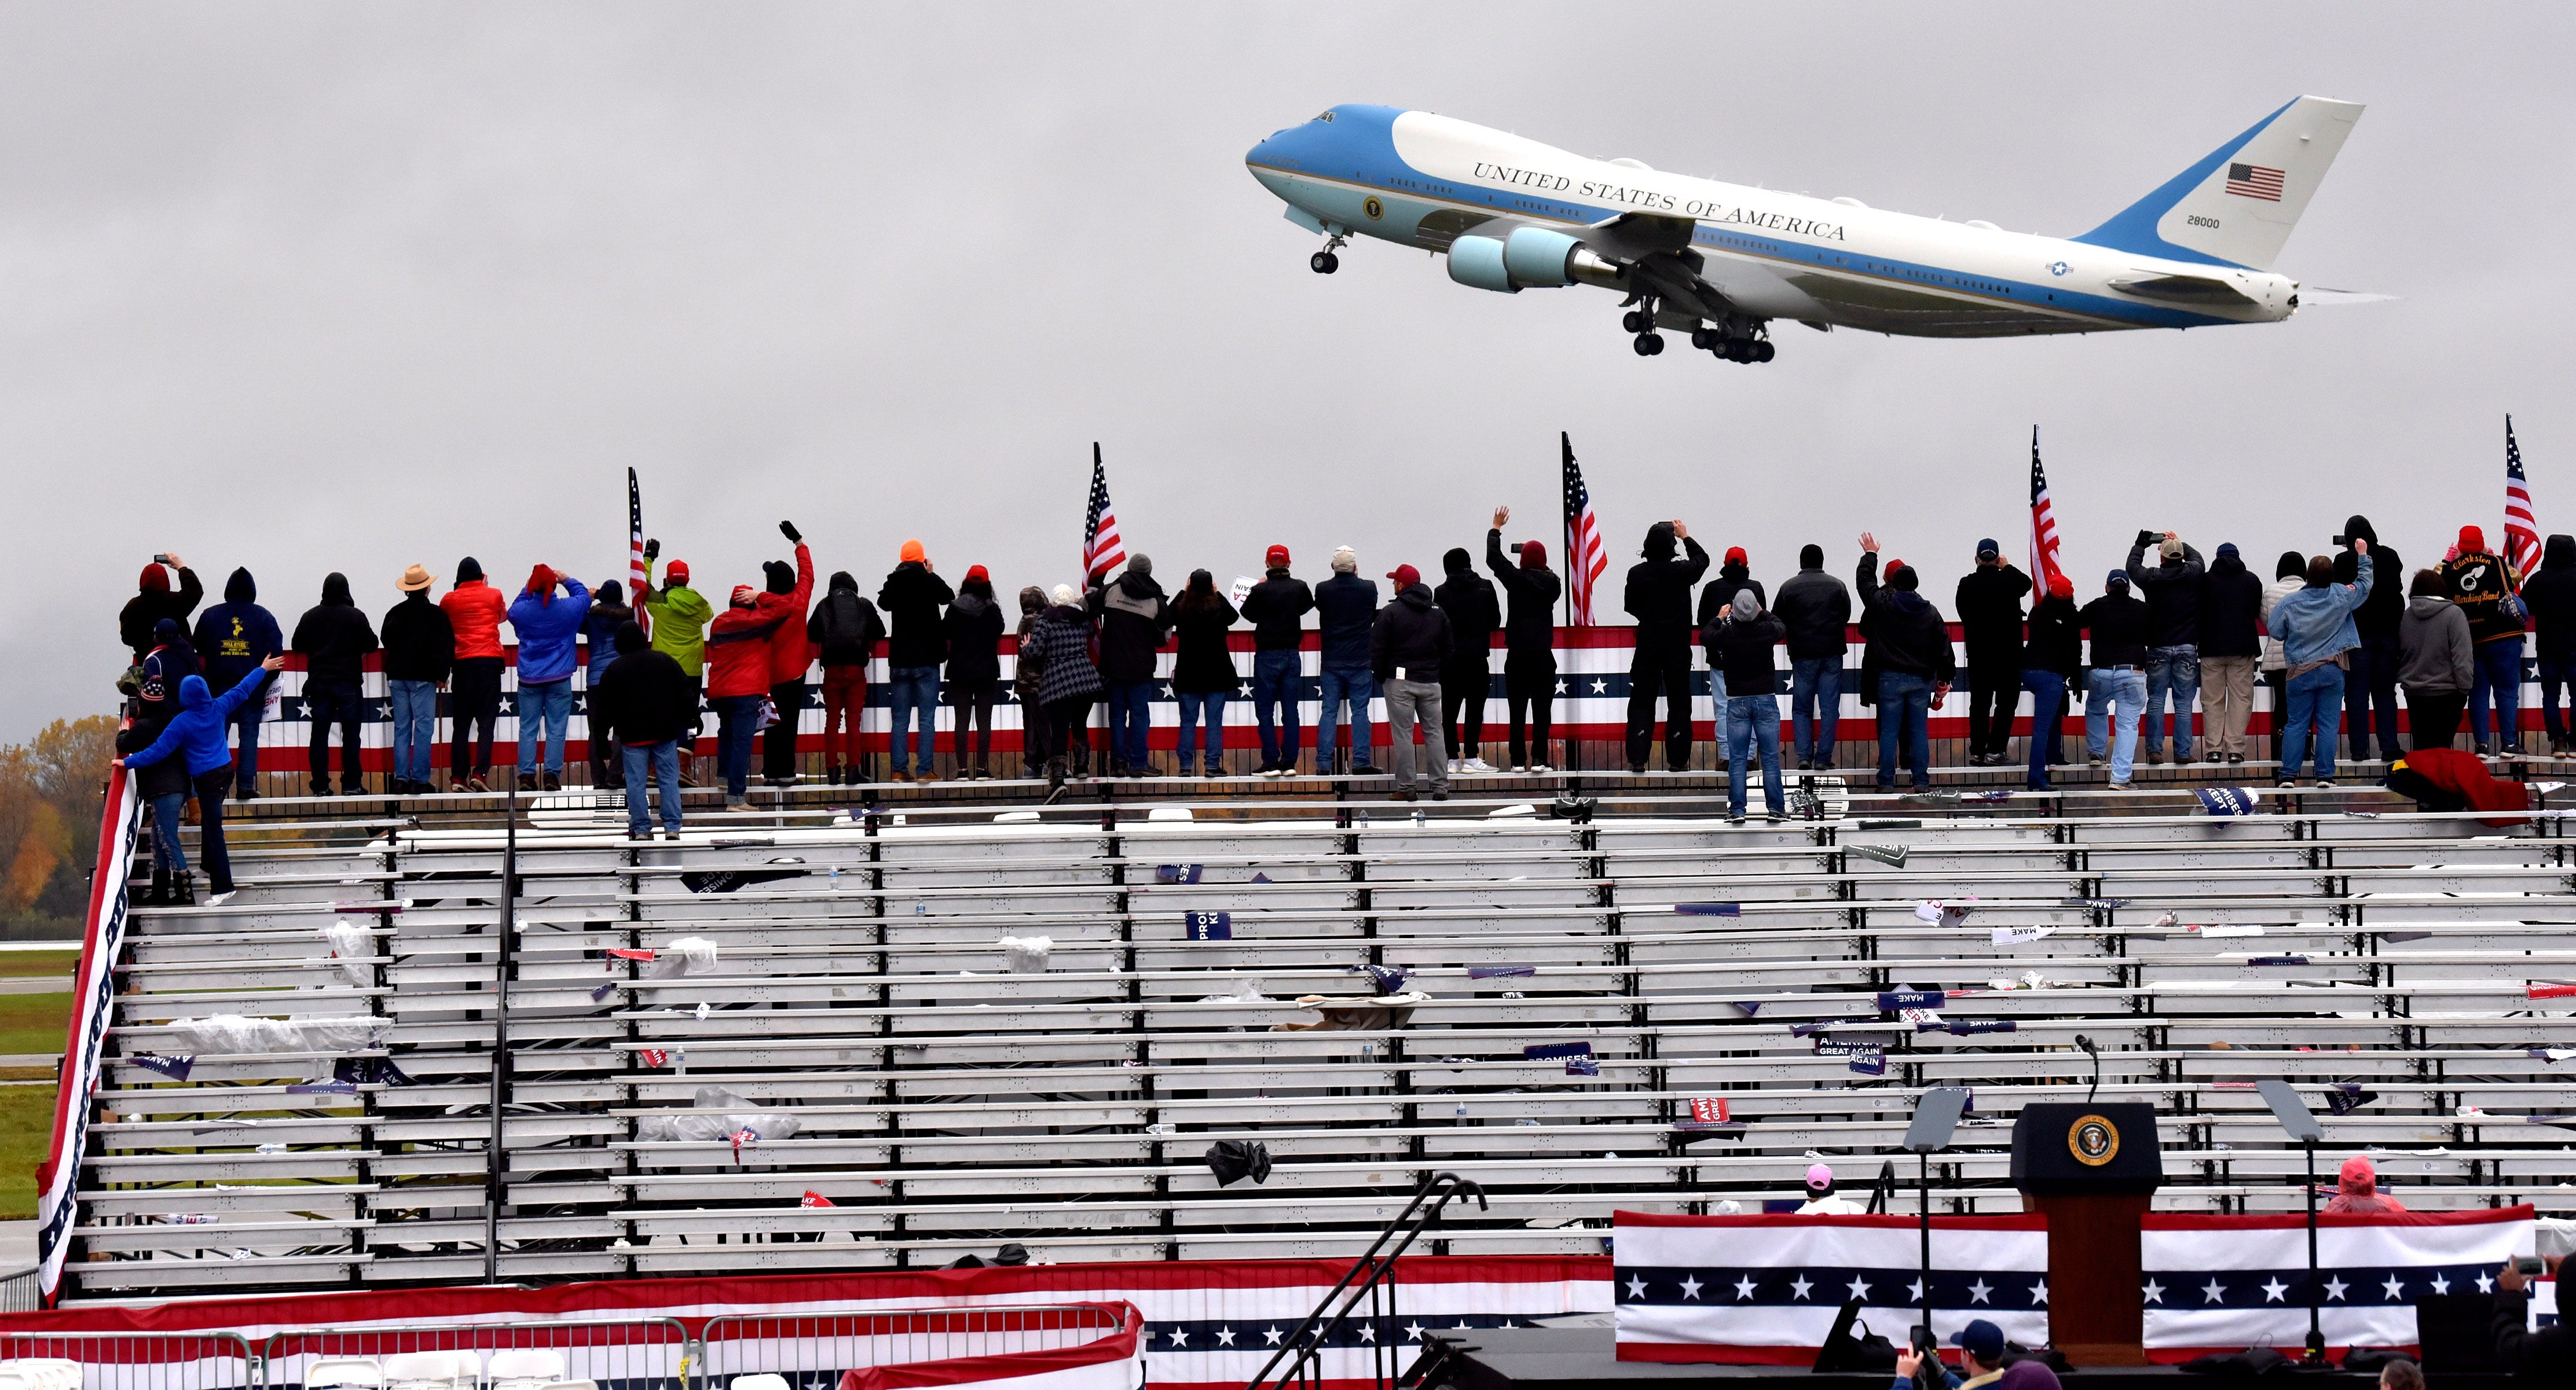 Trump supporters wave as the President flies away aboard Air Force One after his campaign stop in Lansing.